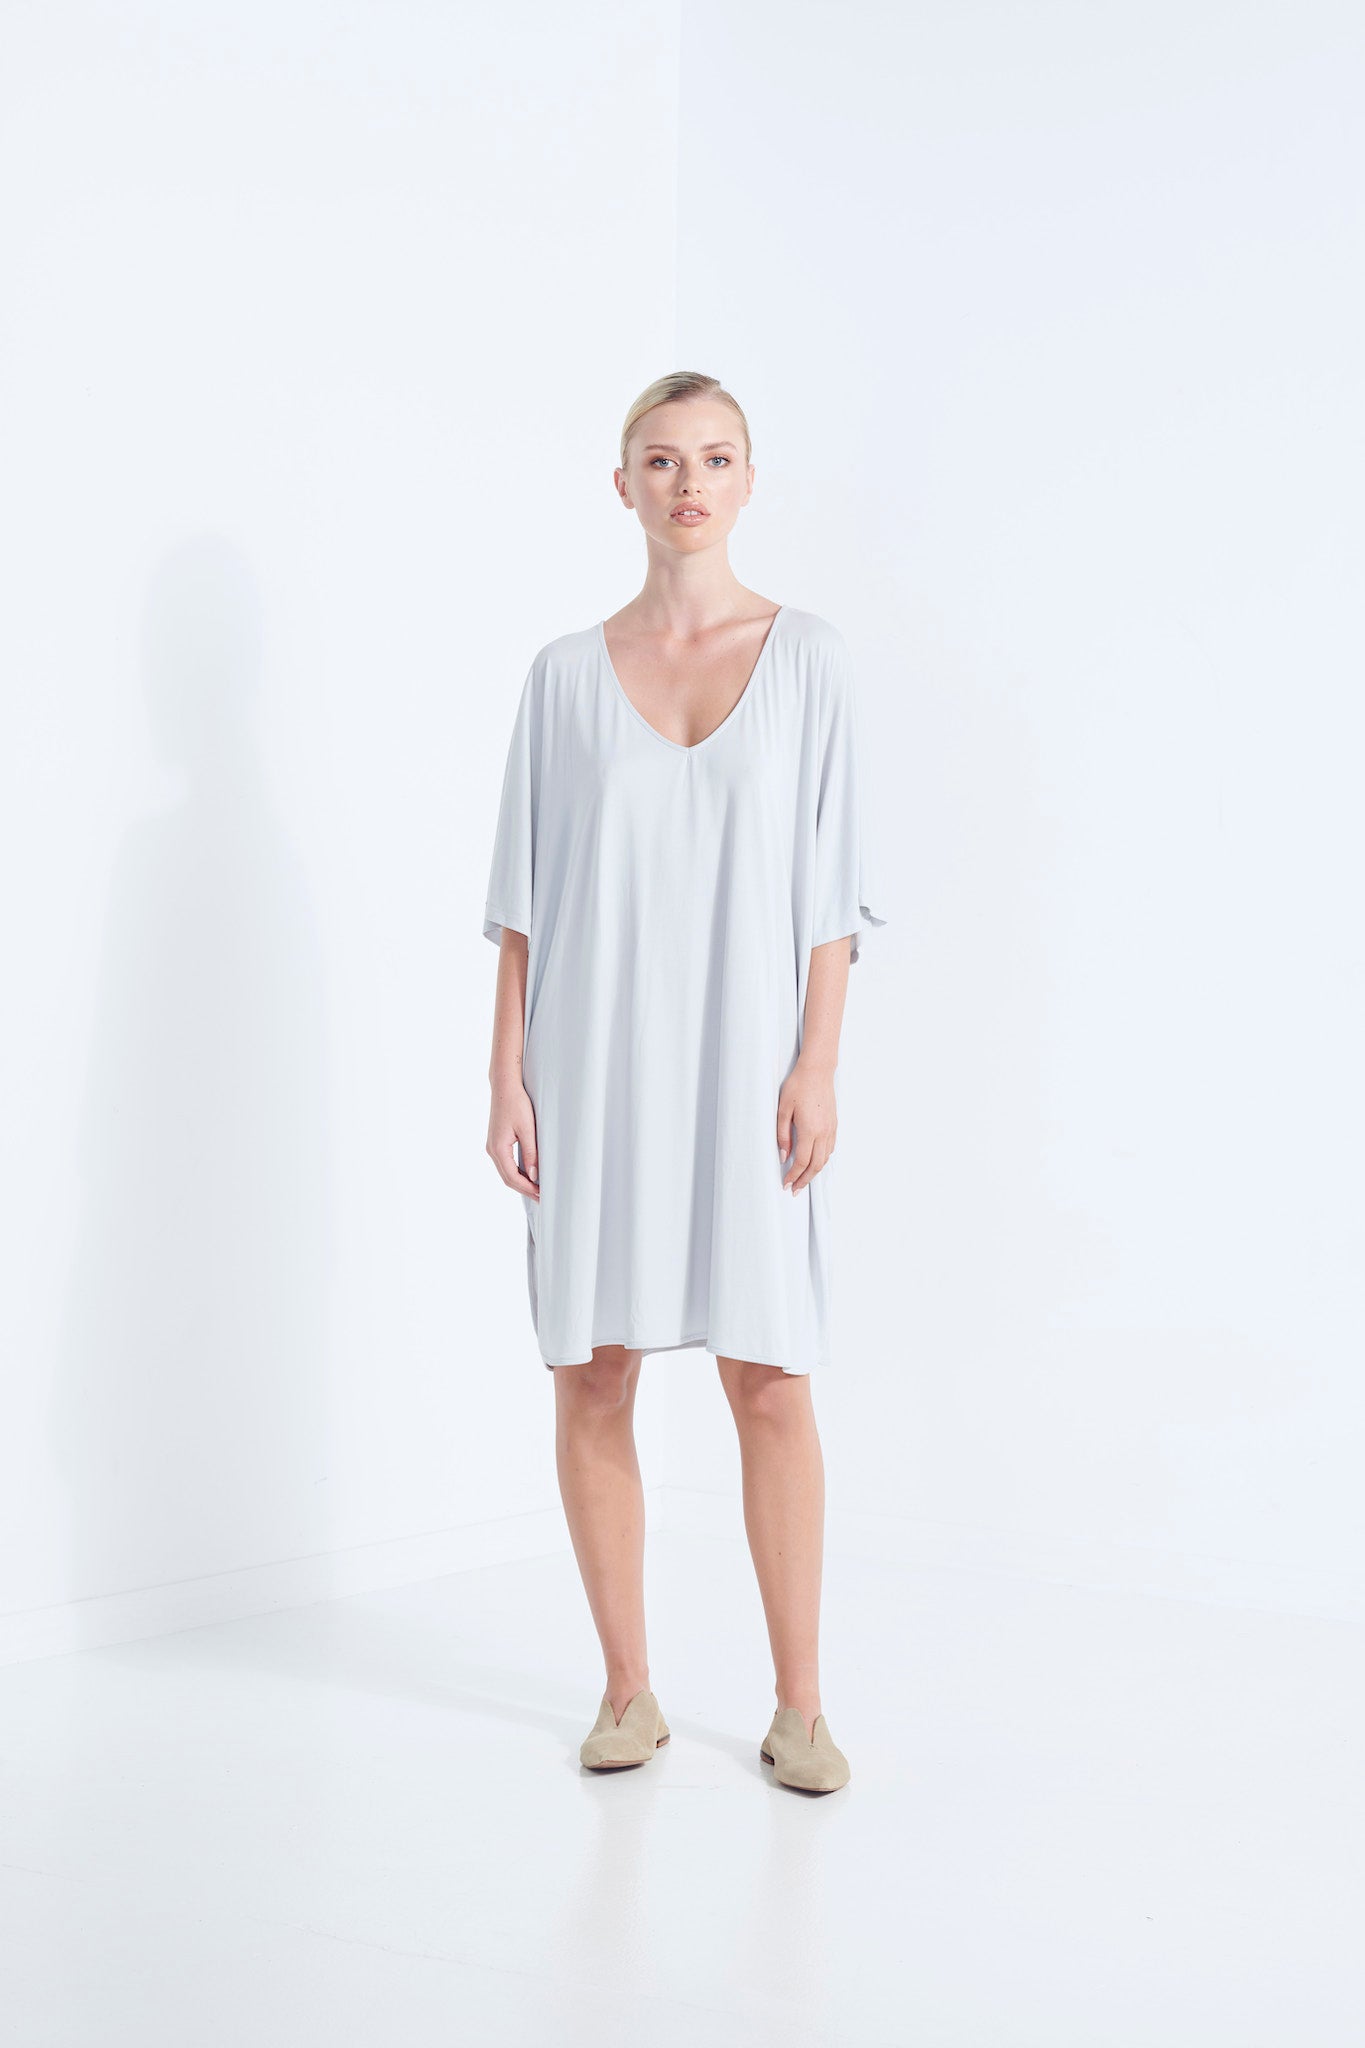 THEMIS DRESS LONGLINE T-SHIRT BEECHWOOD MODAL STRETCH WITH REMOVABLE TIE WISP PALE WASHED GREY FRONT VIEW